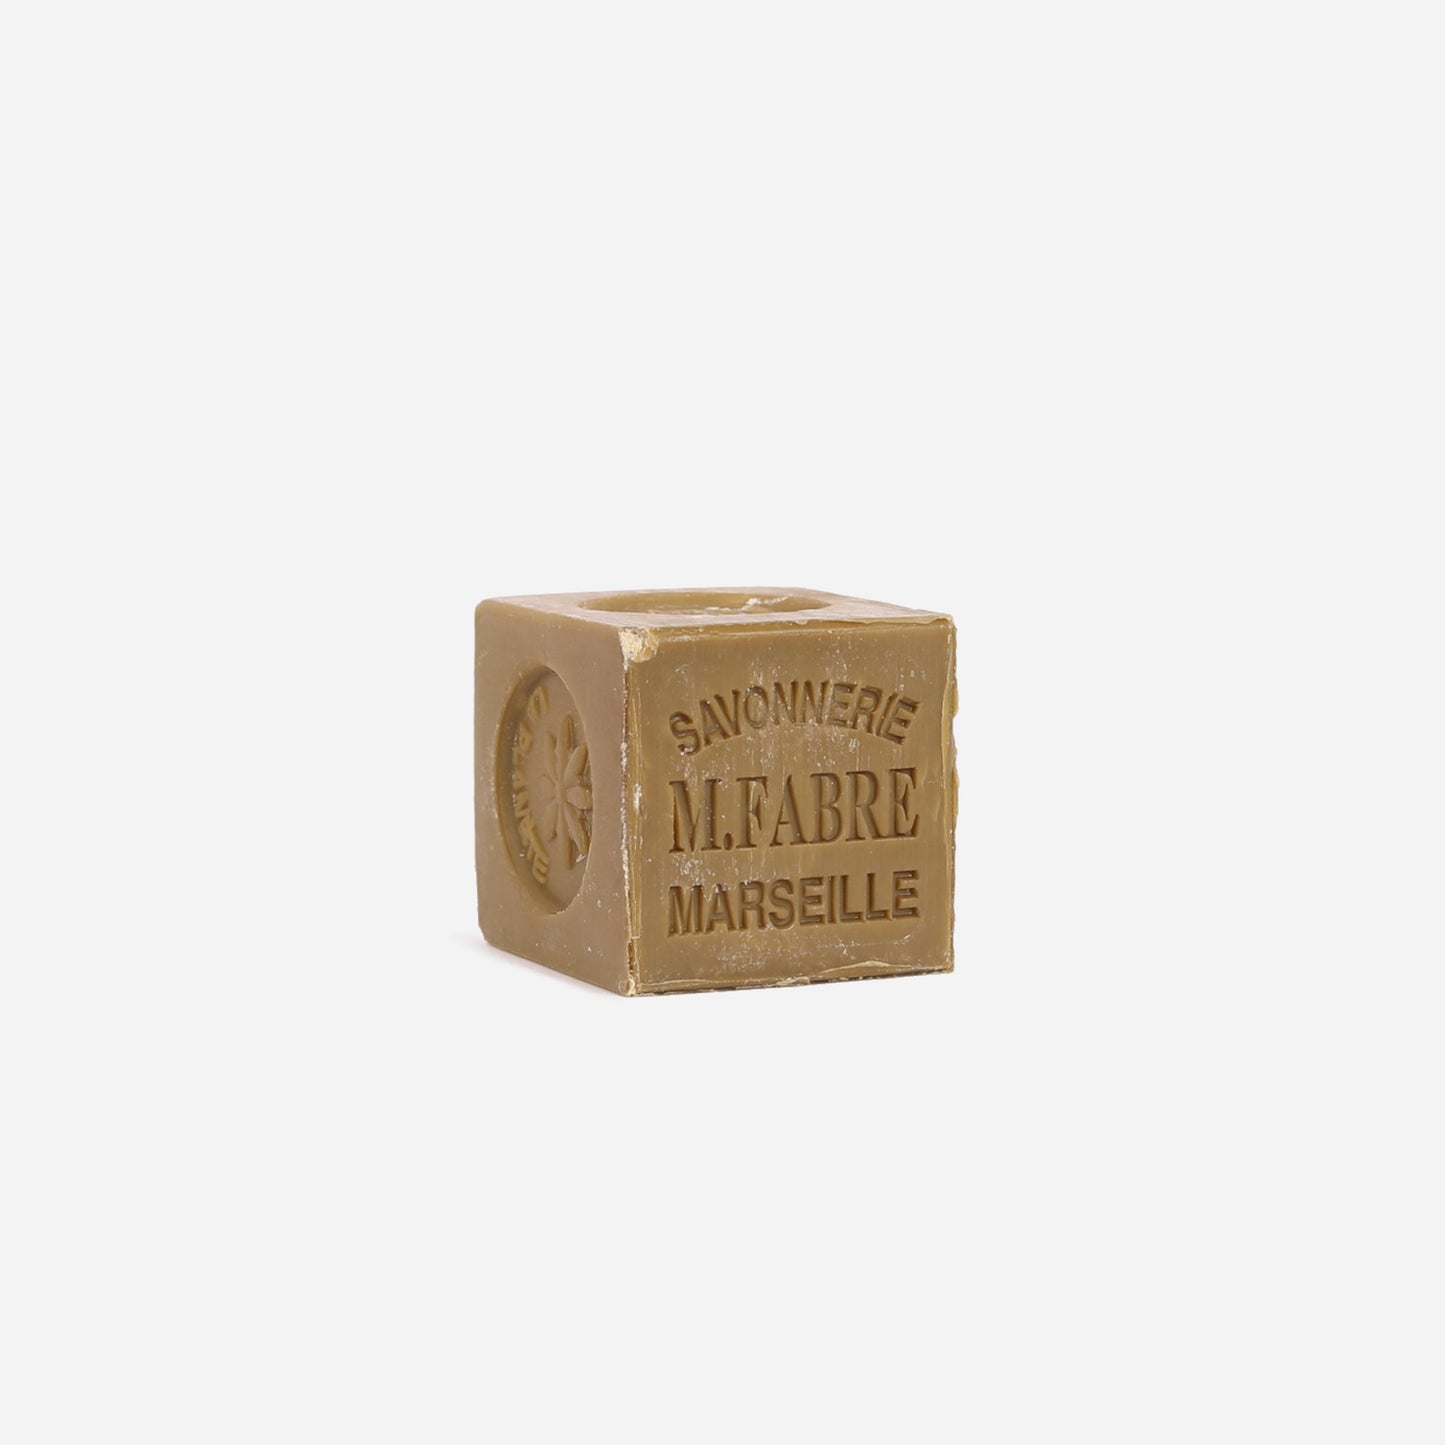 Marseille Olive Oil Soap, 200g